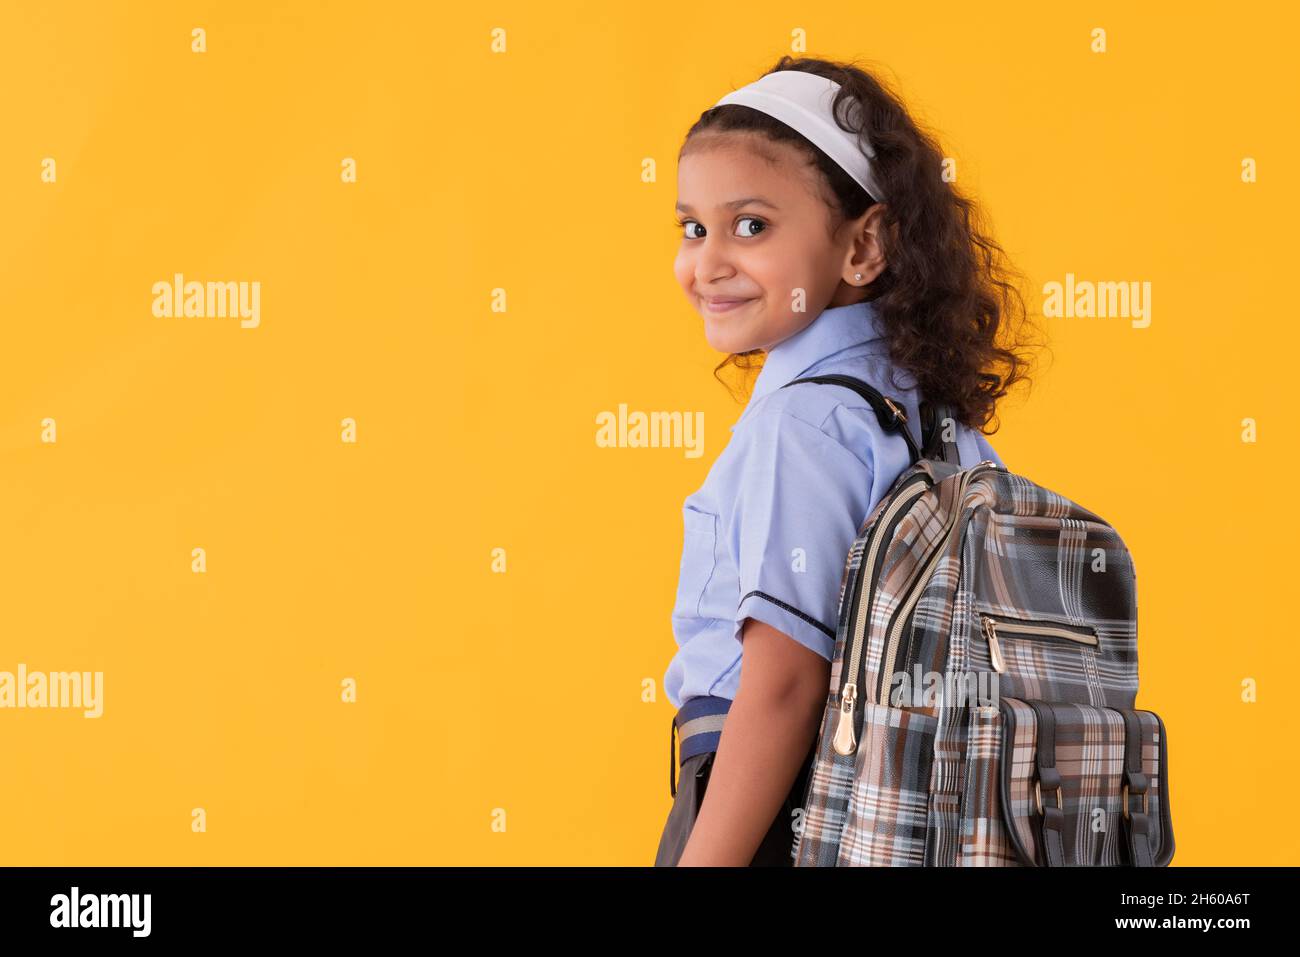 A HAPPY GIRL IN UNIFORM TURNING BEHIND AND LOOKING AT CAMERA Stock Photo